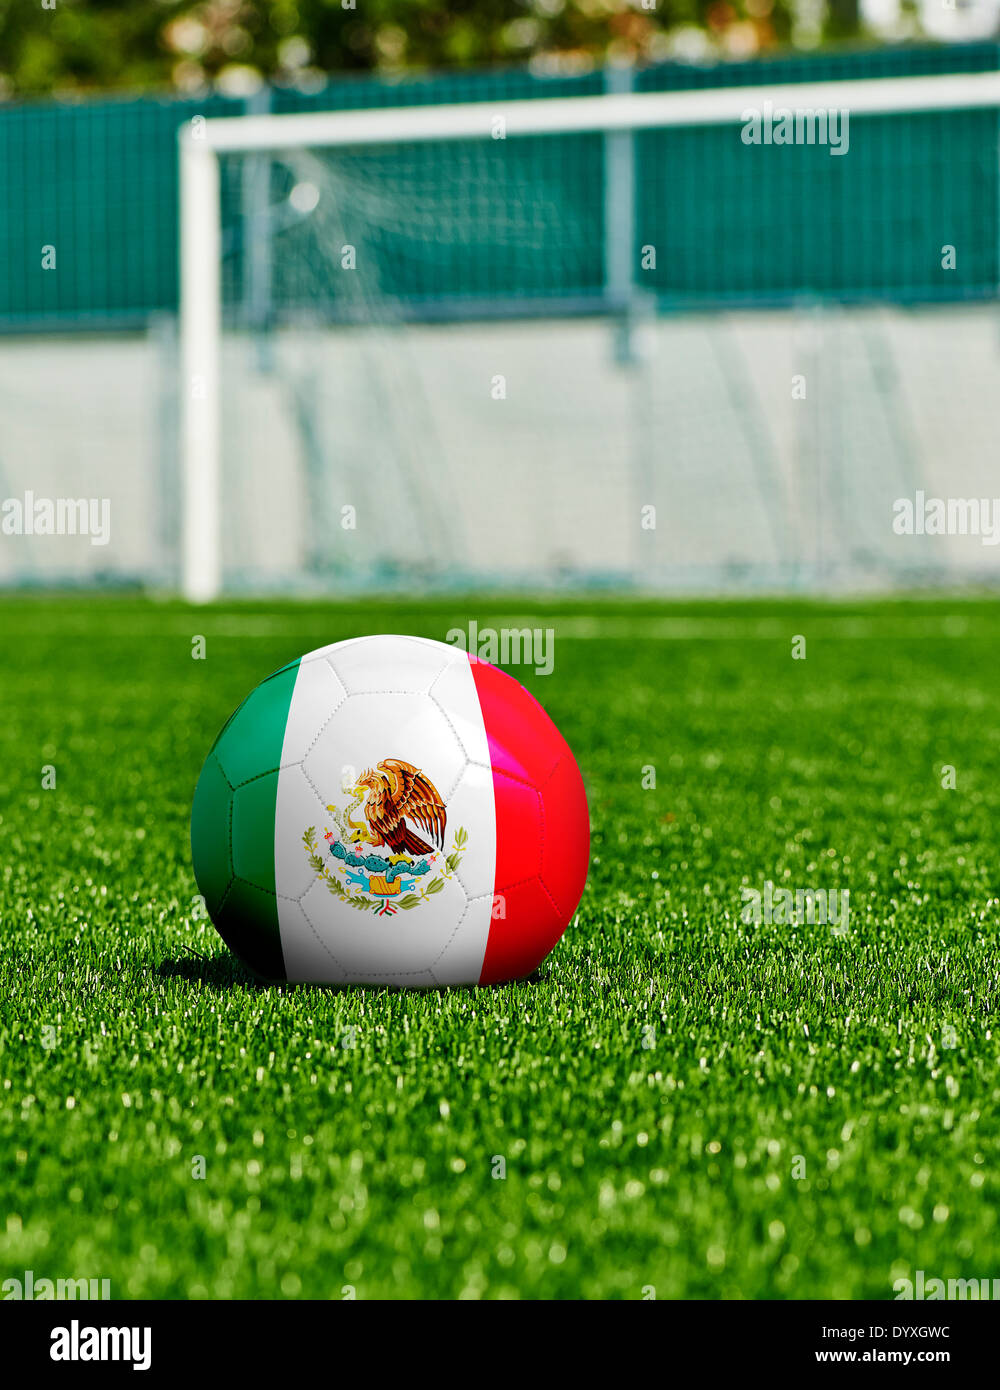 Soccer Ball with Mexico Flag on the grass in stadium Stock Photo